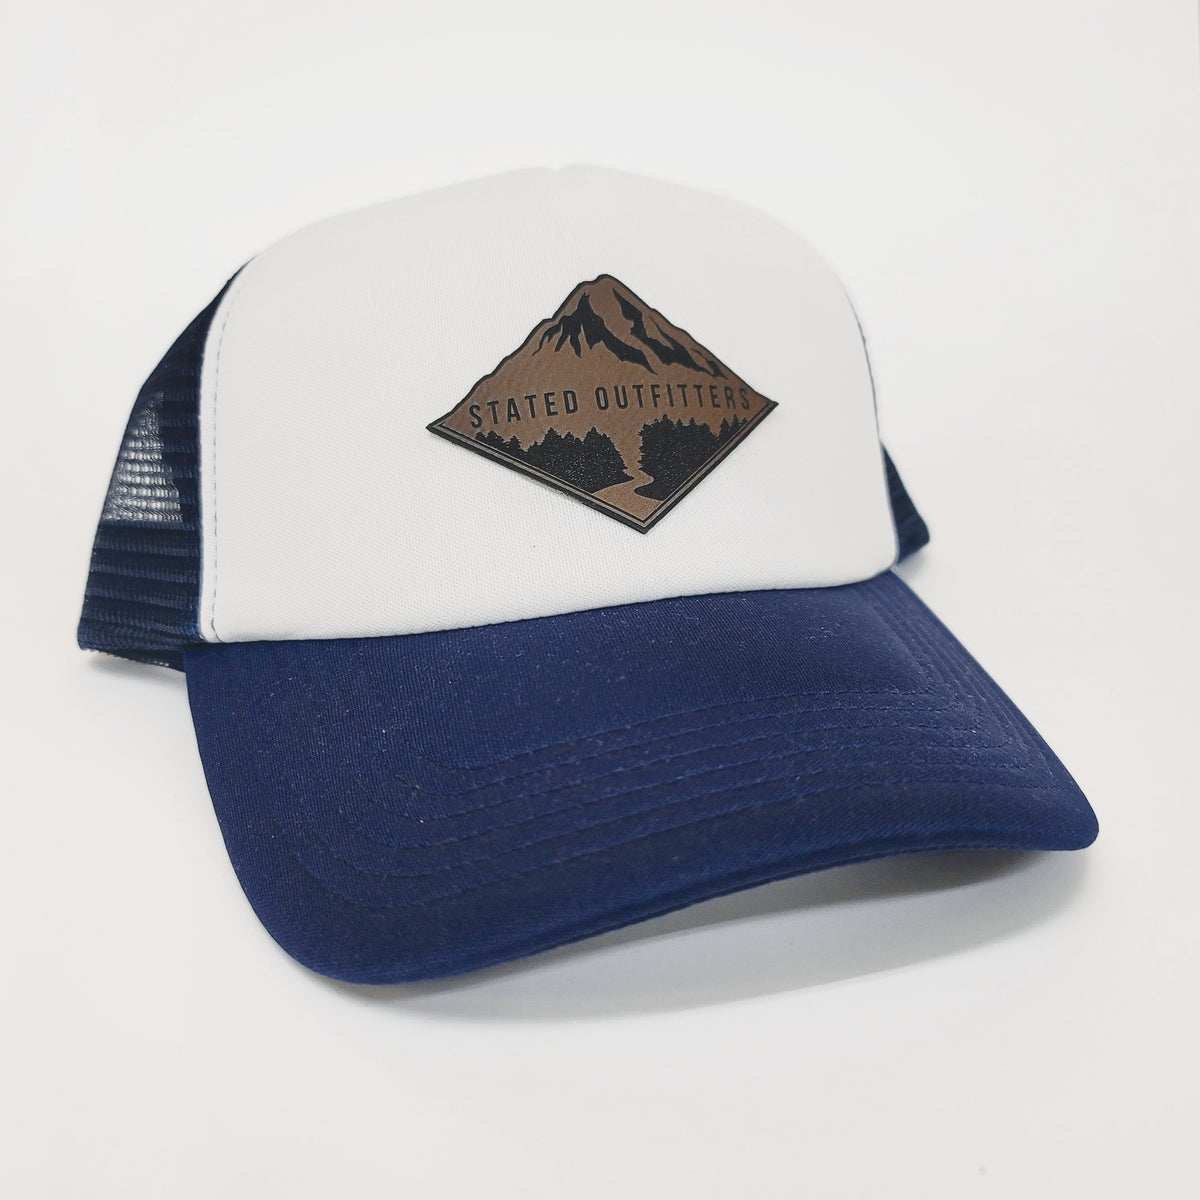 Stated Outfitters Patch Navy/White Foam Hat